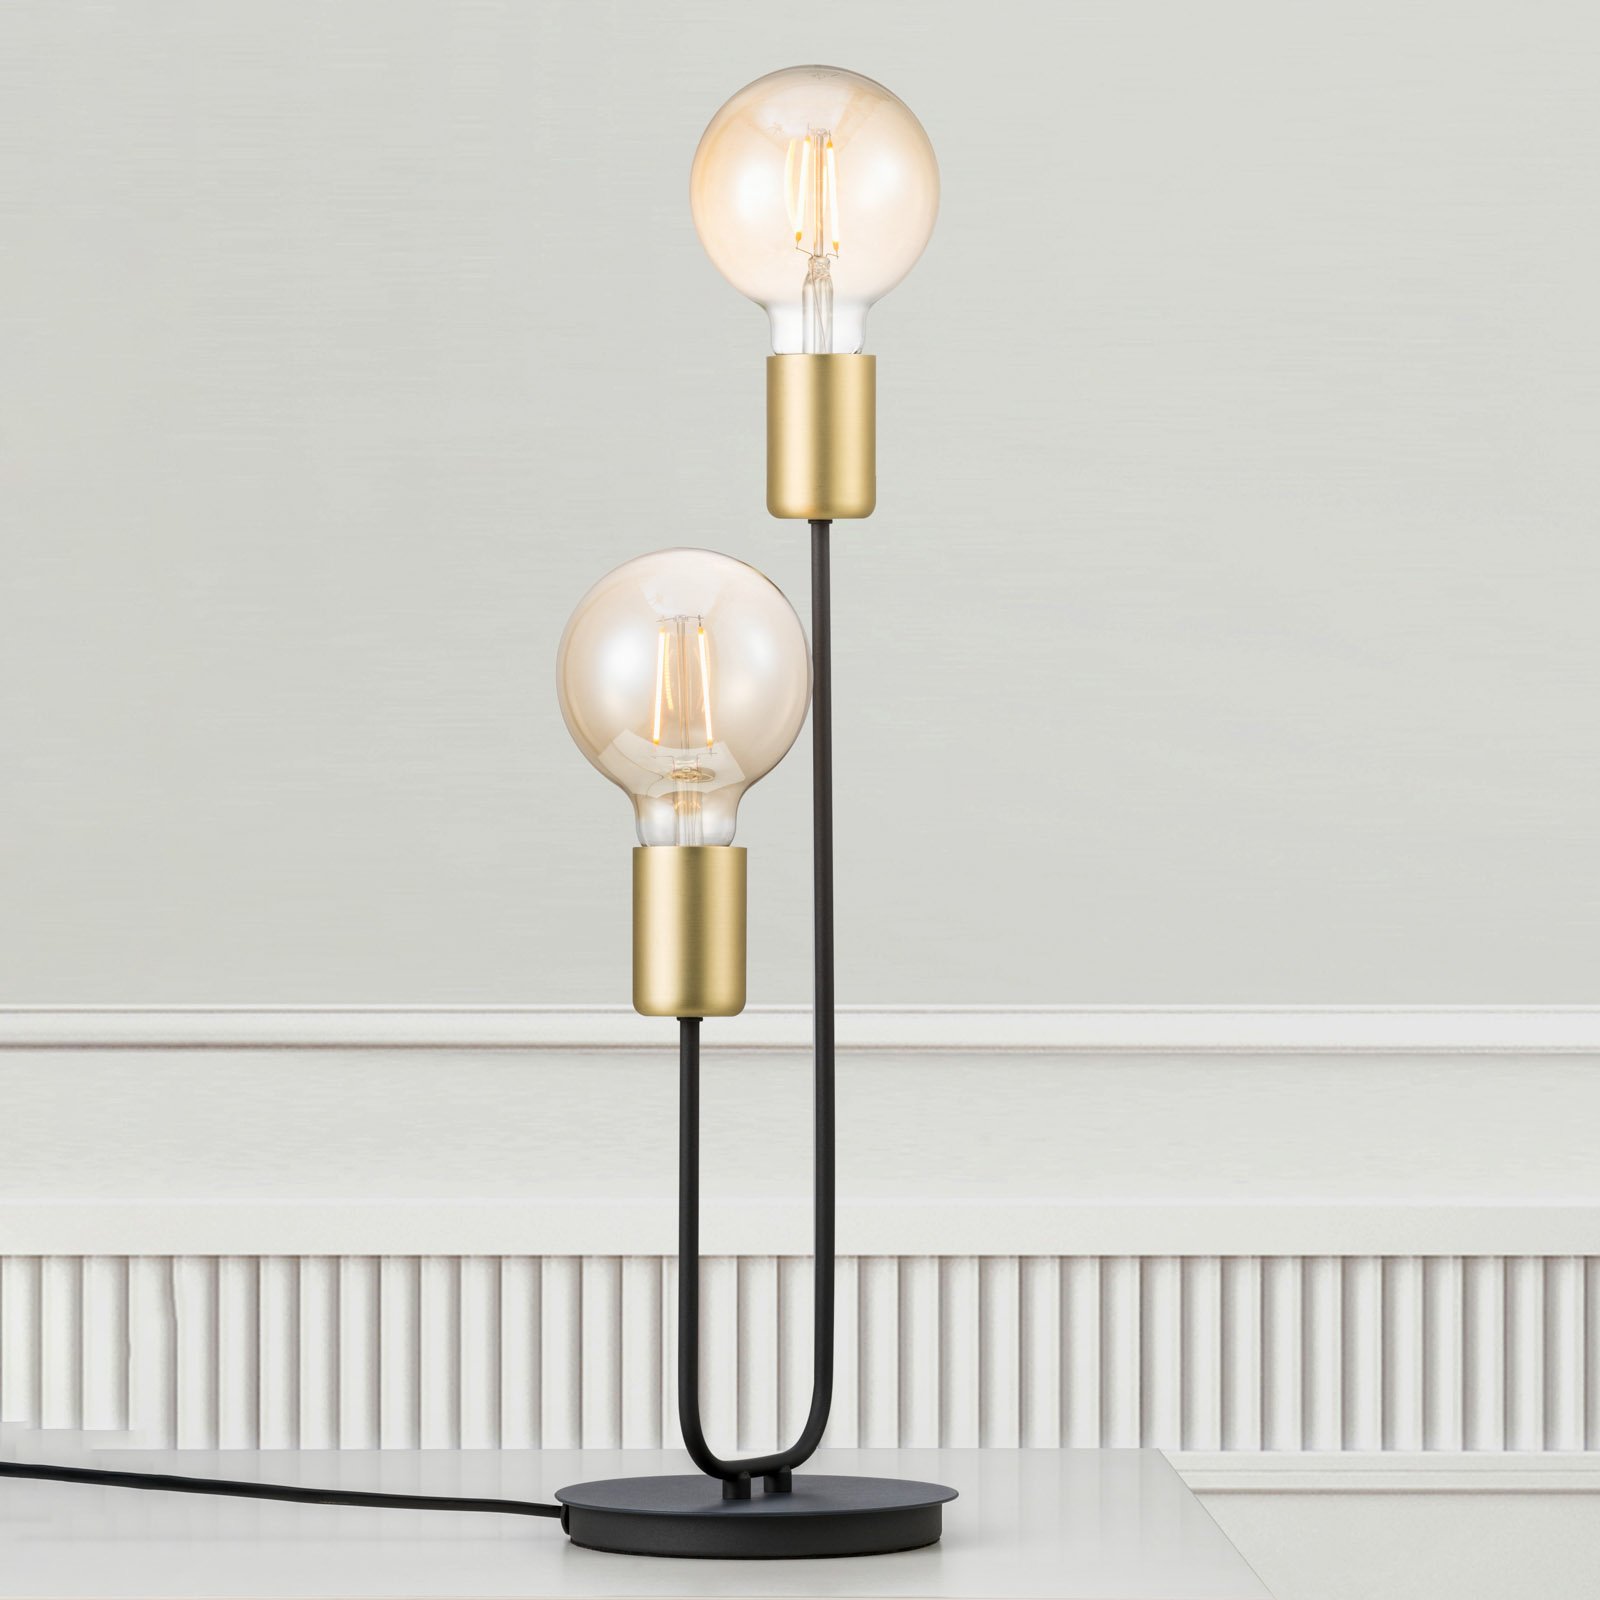 Josefine table lamp with two sockets